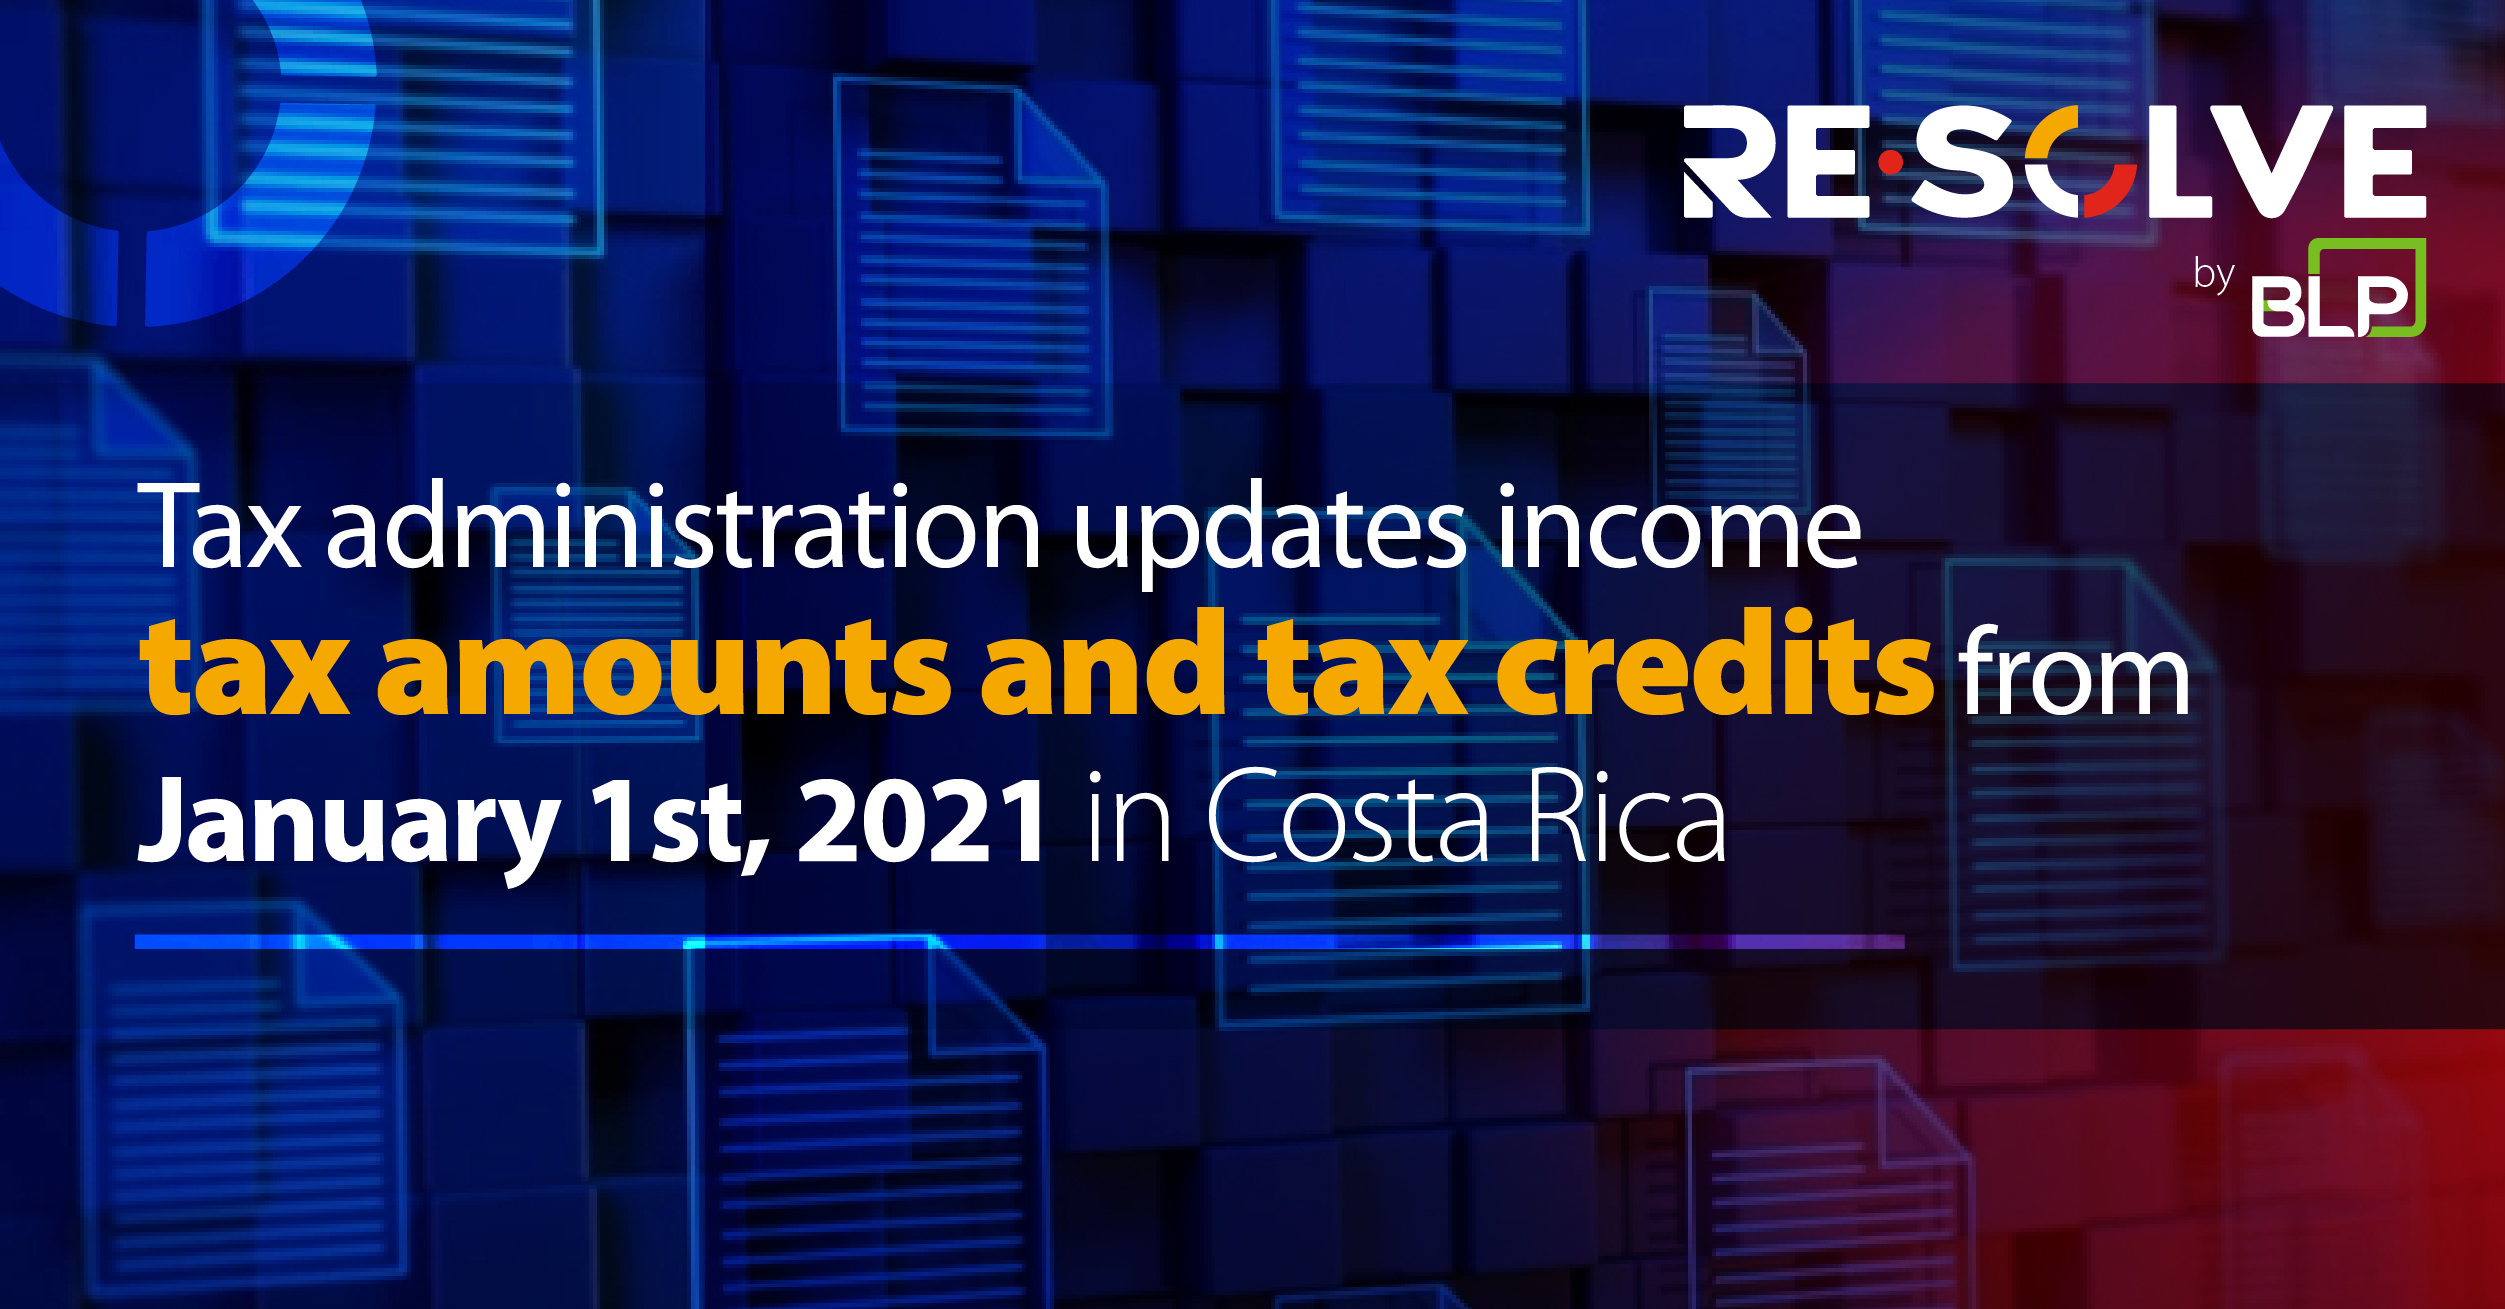 Costa Rica Tax Administration updates Income Tax amounts and tax credits from January 1st, 2021.